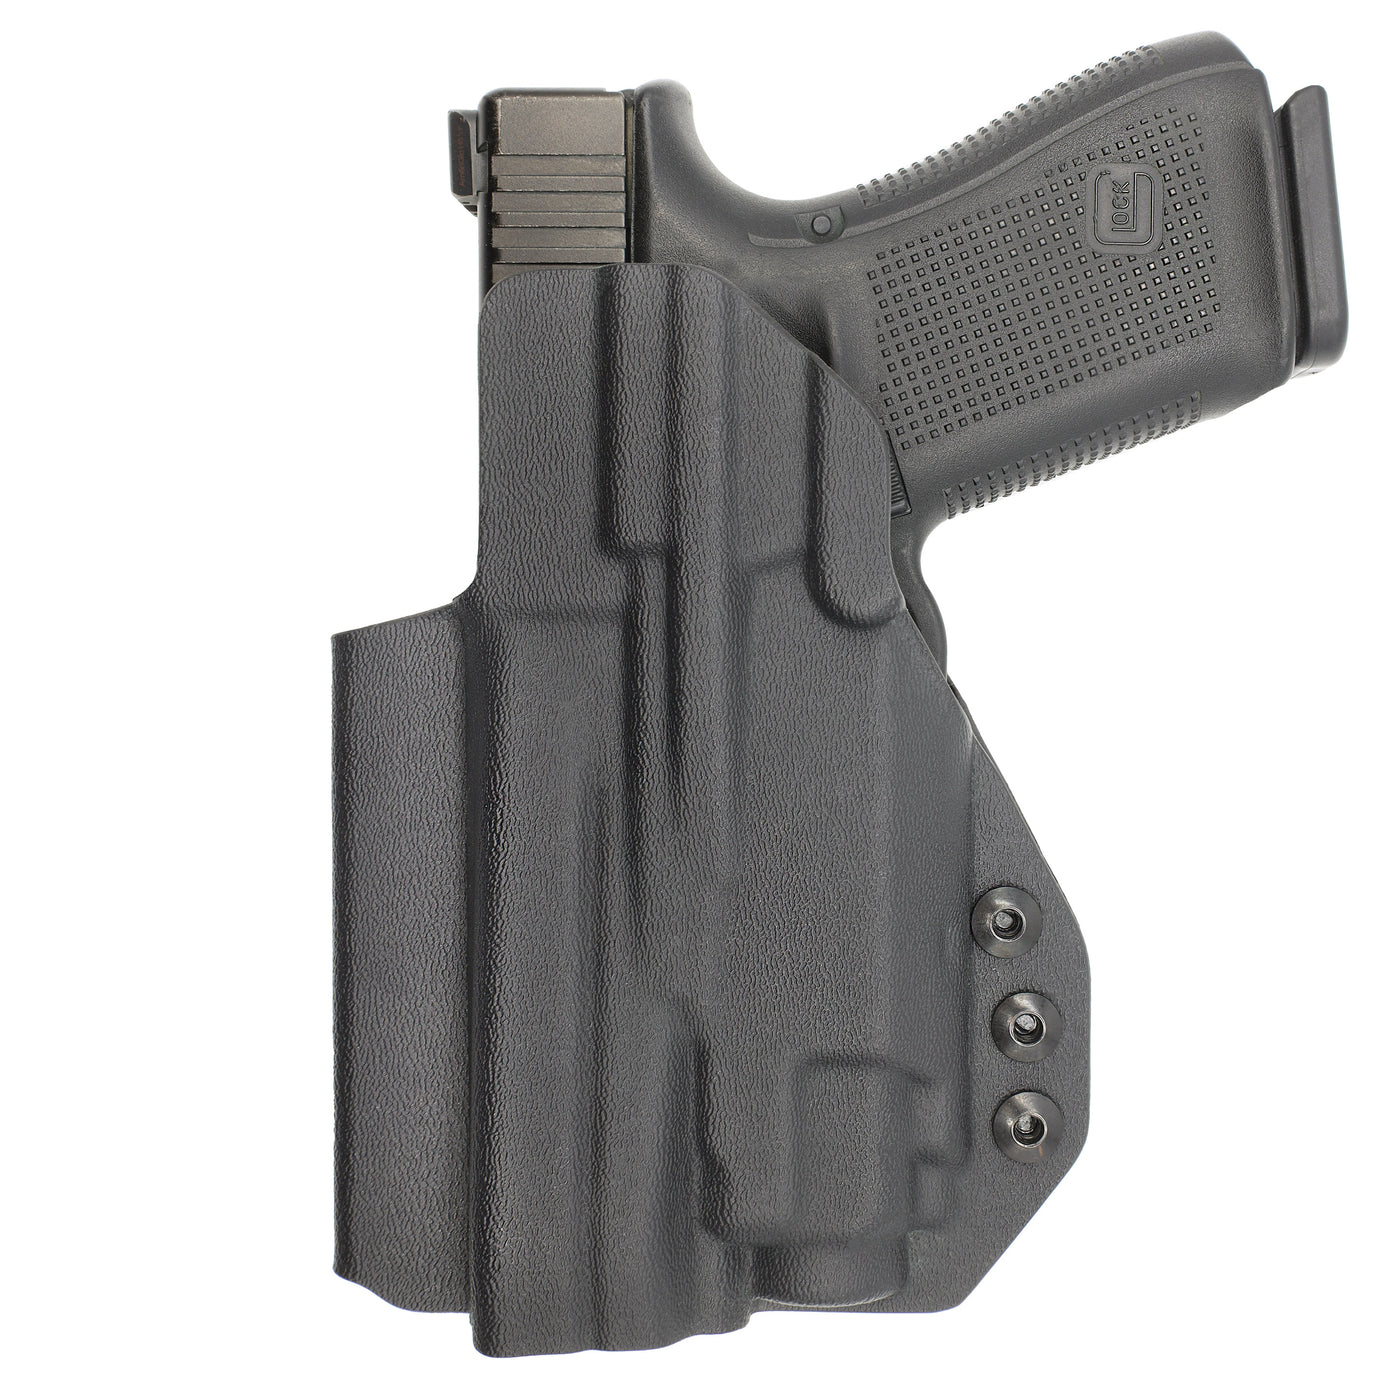 C&G Holsters Custom IWB Tactical Shadow Systems Streamlight TLR8 holstered back view